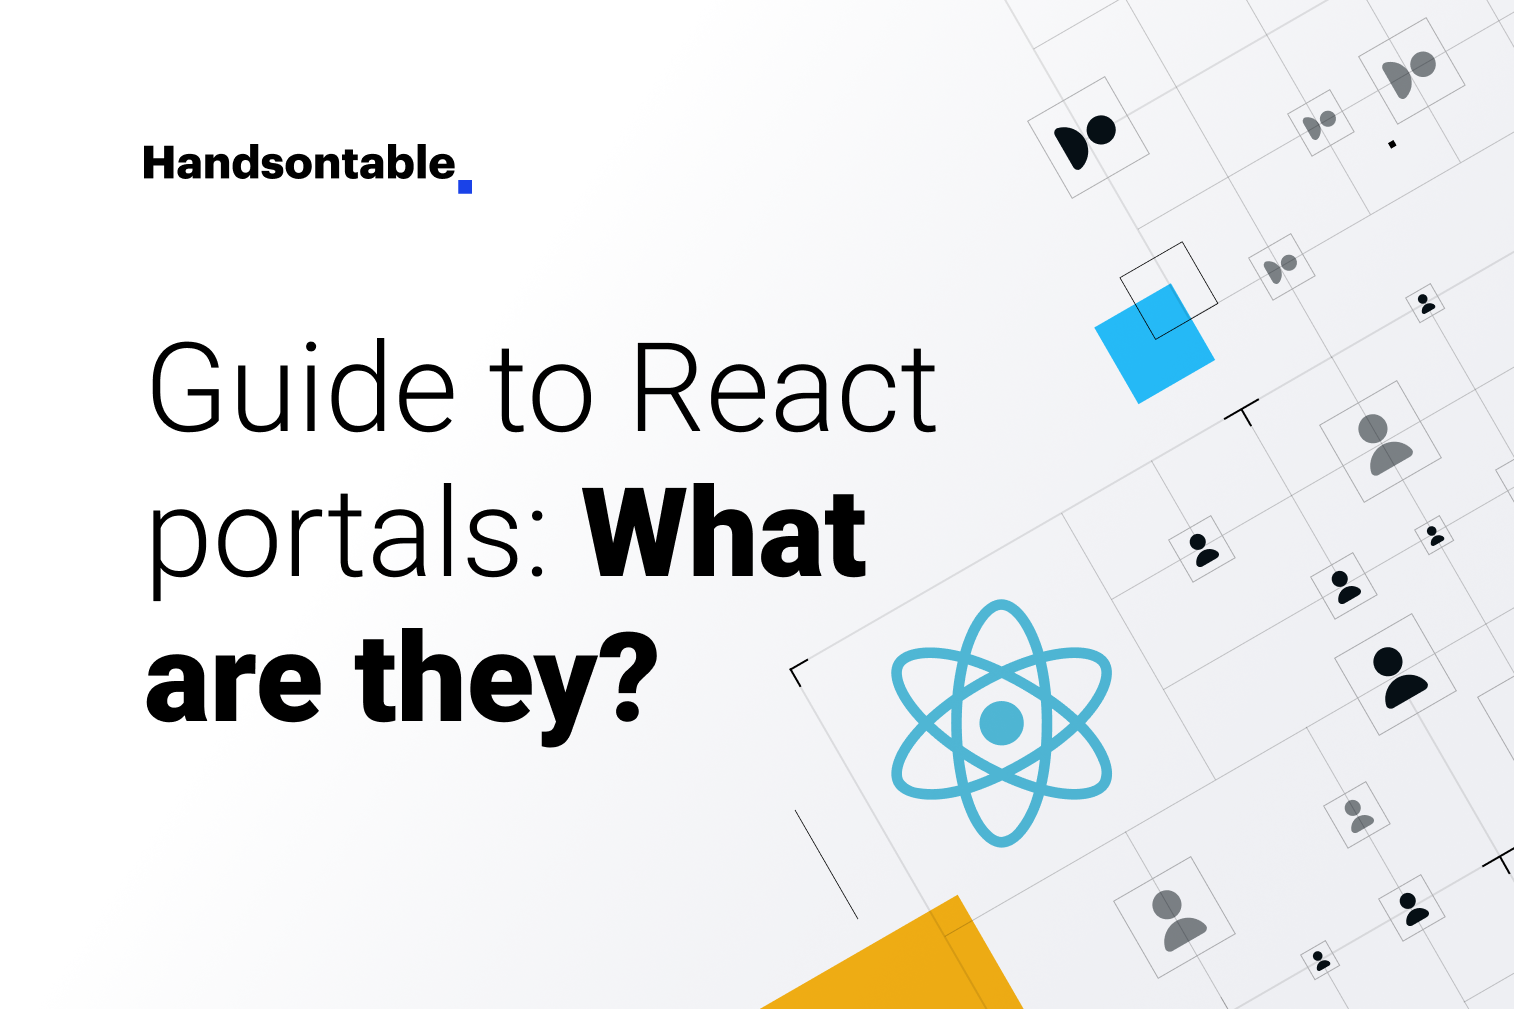 Illustration for blog about React portals